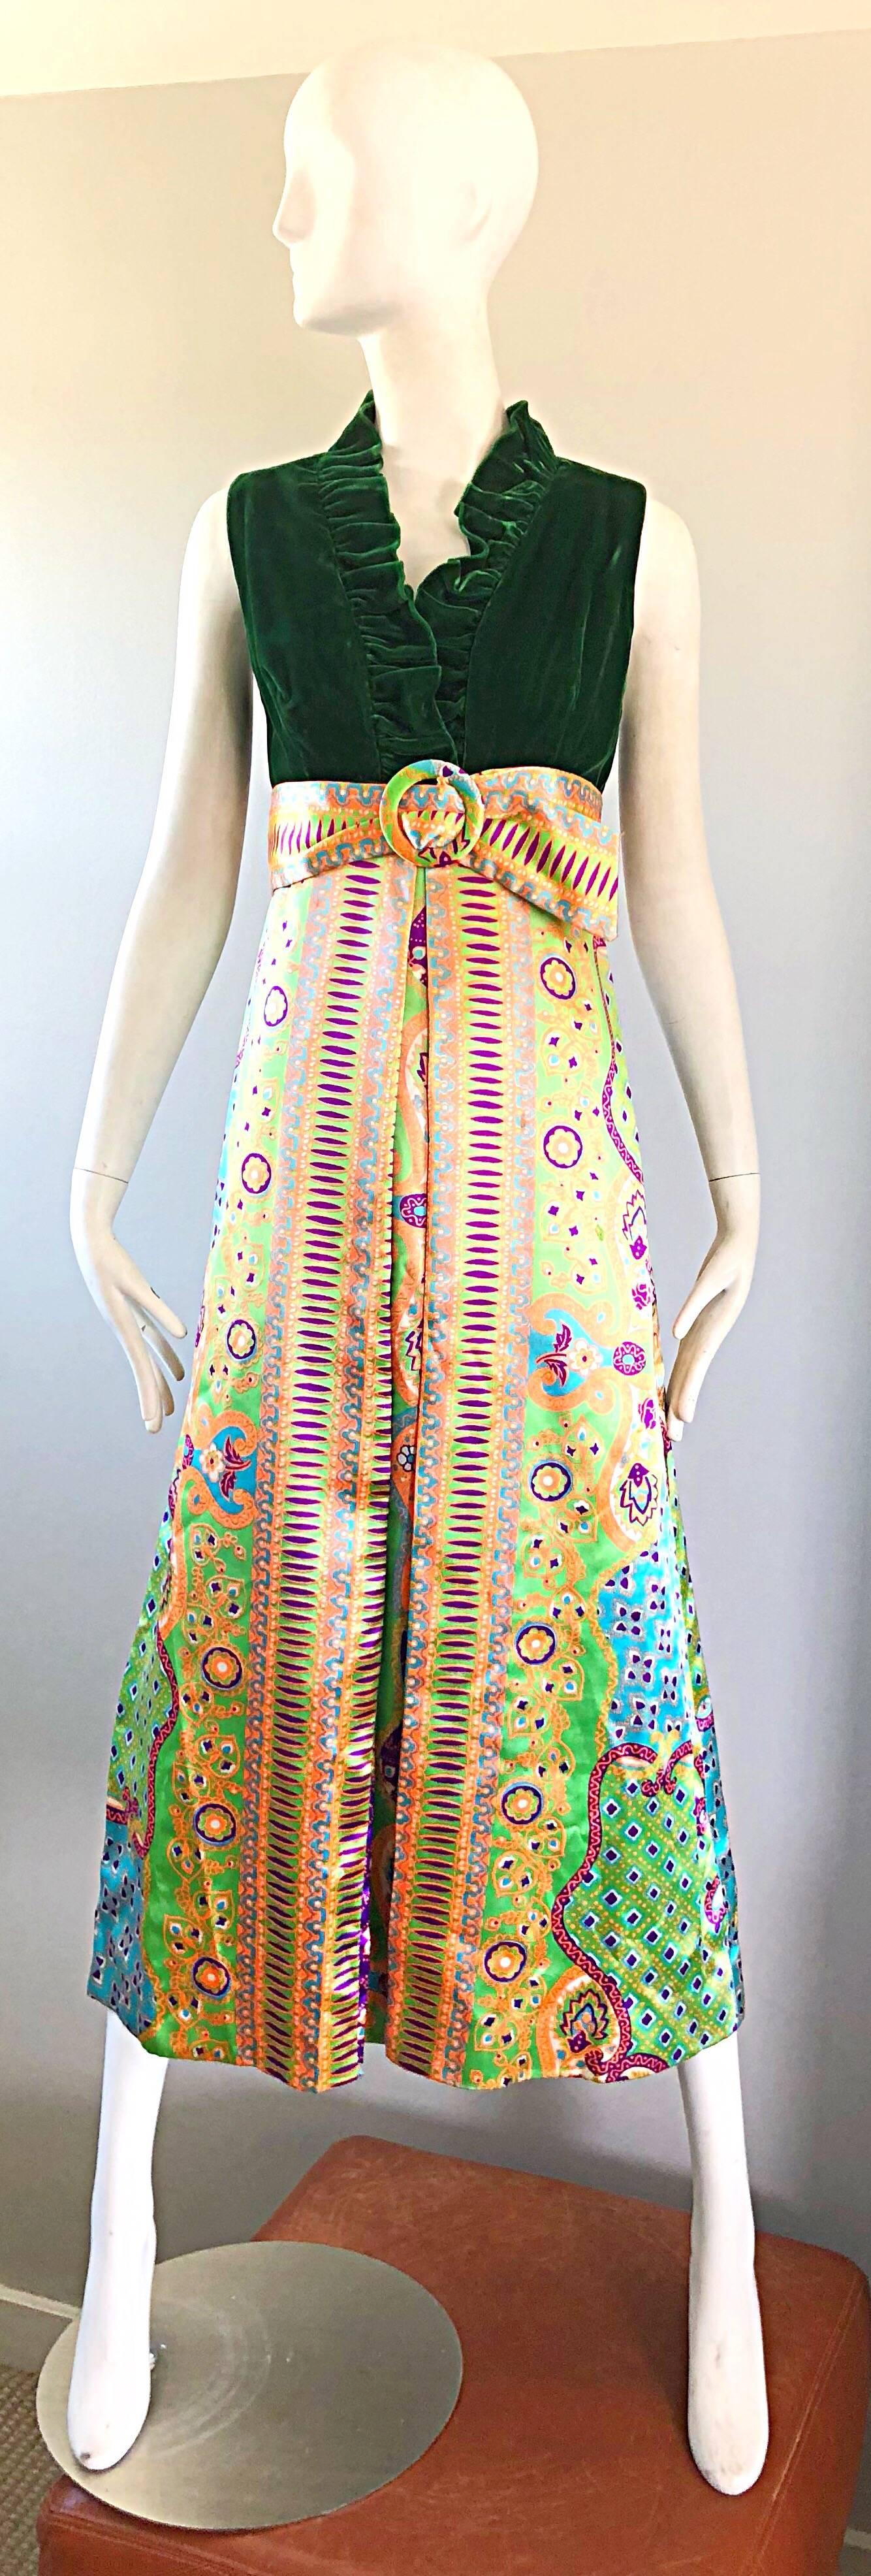 Spectacular 70s OSCAR DE LA RENTA silk and velvet psychedelic print colorful maxi dress! Features a fitted deep green velvet bodice with ruffles along the neckline. Hidden snaps allow control of cleavage. Attached silk skirt has psychedelic prints